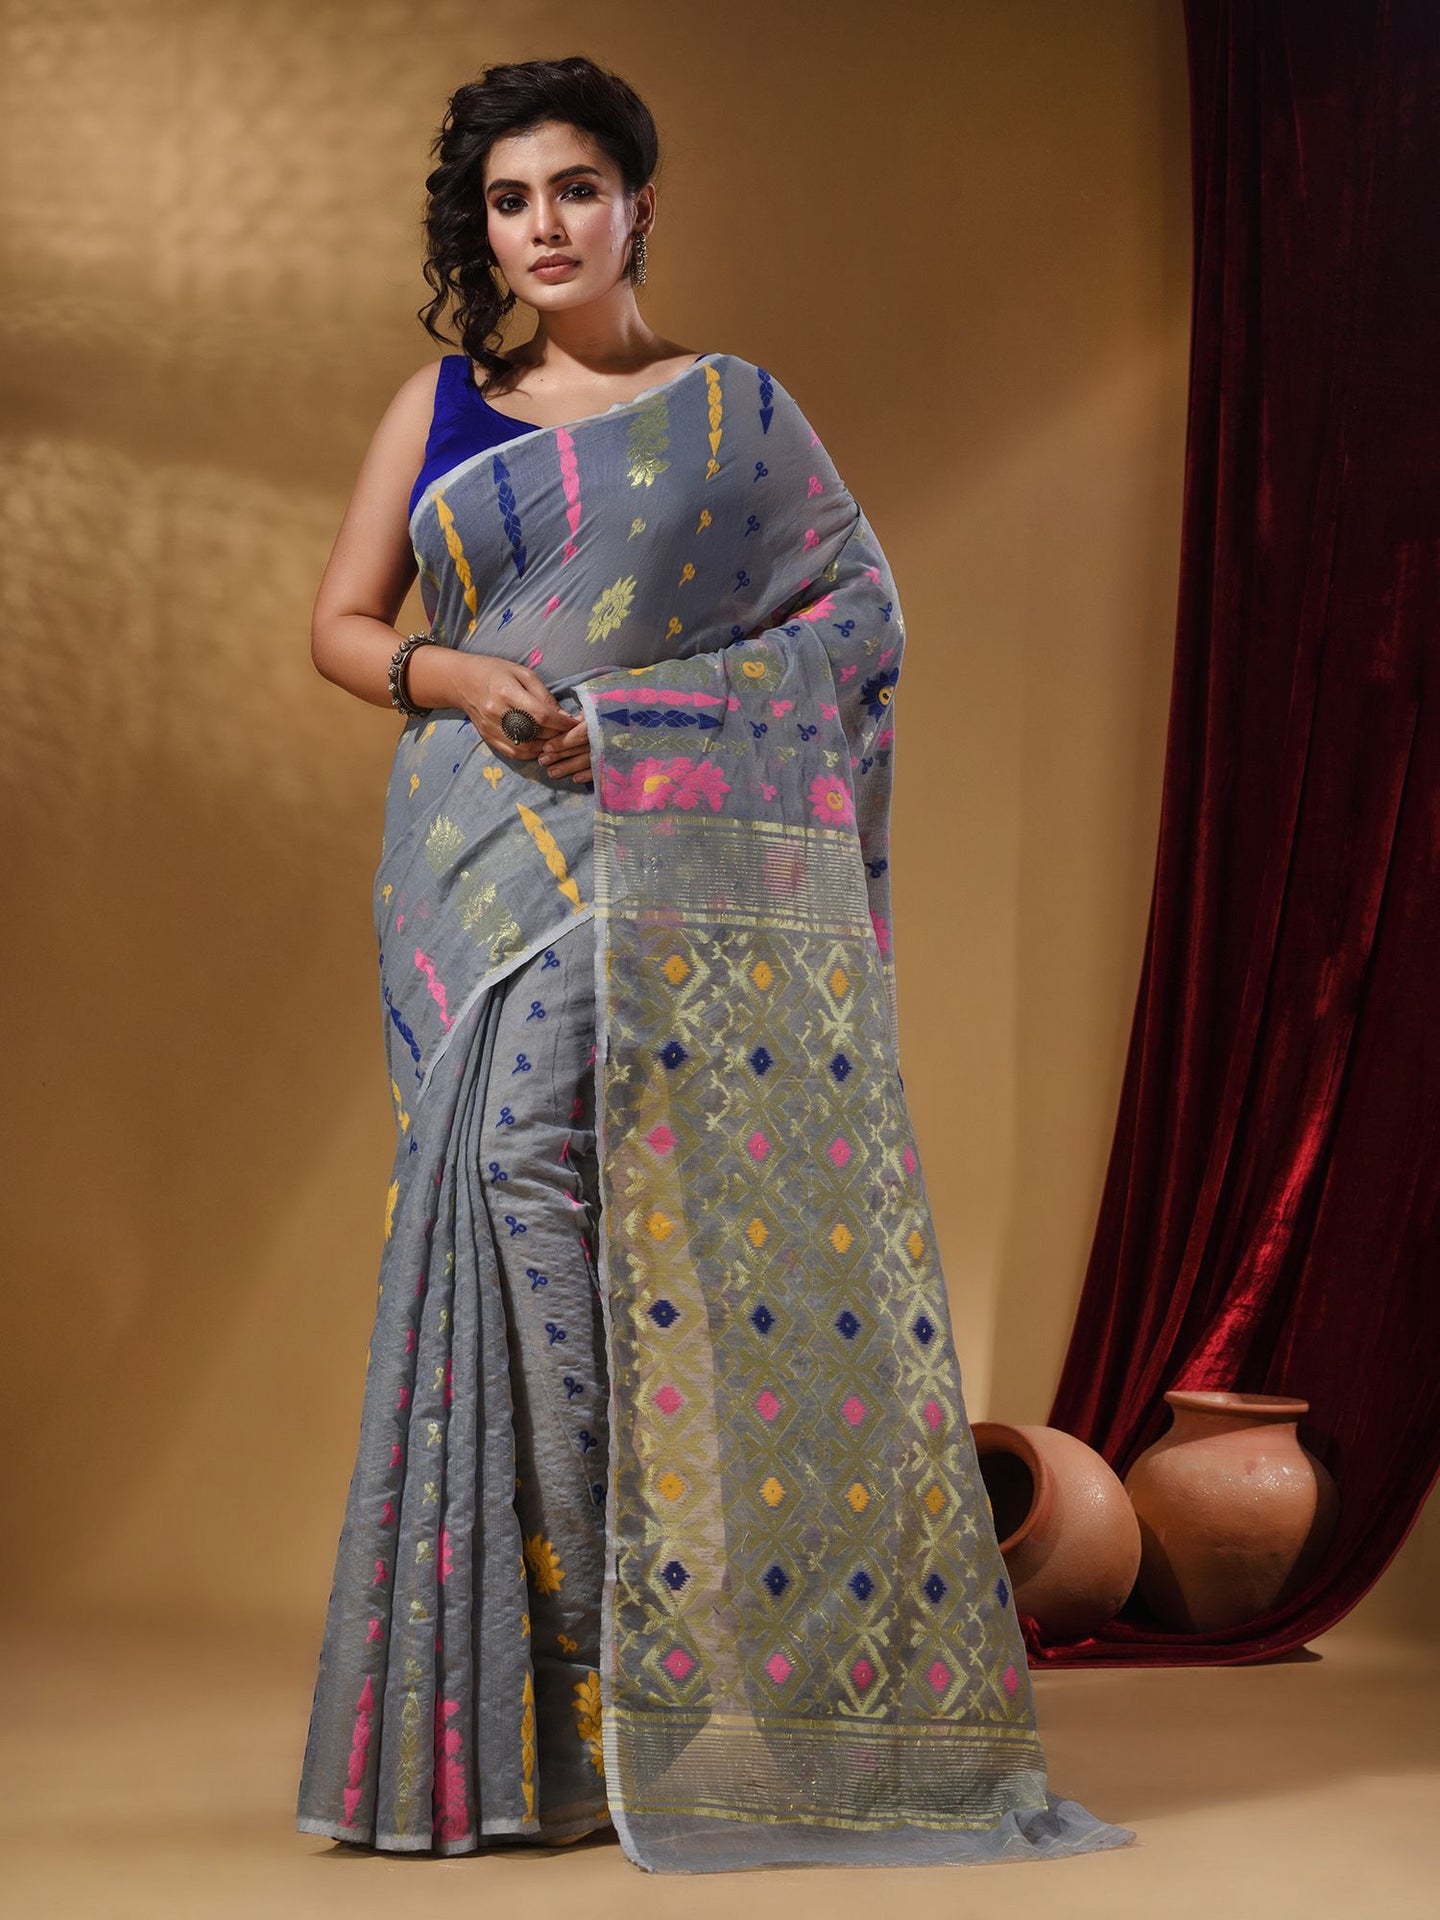 Light Grey Cotton Handwoven Jamdani Saree With Multicolor Floral Designs And Motifs